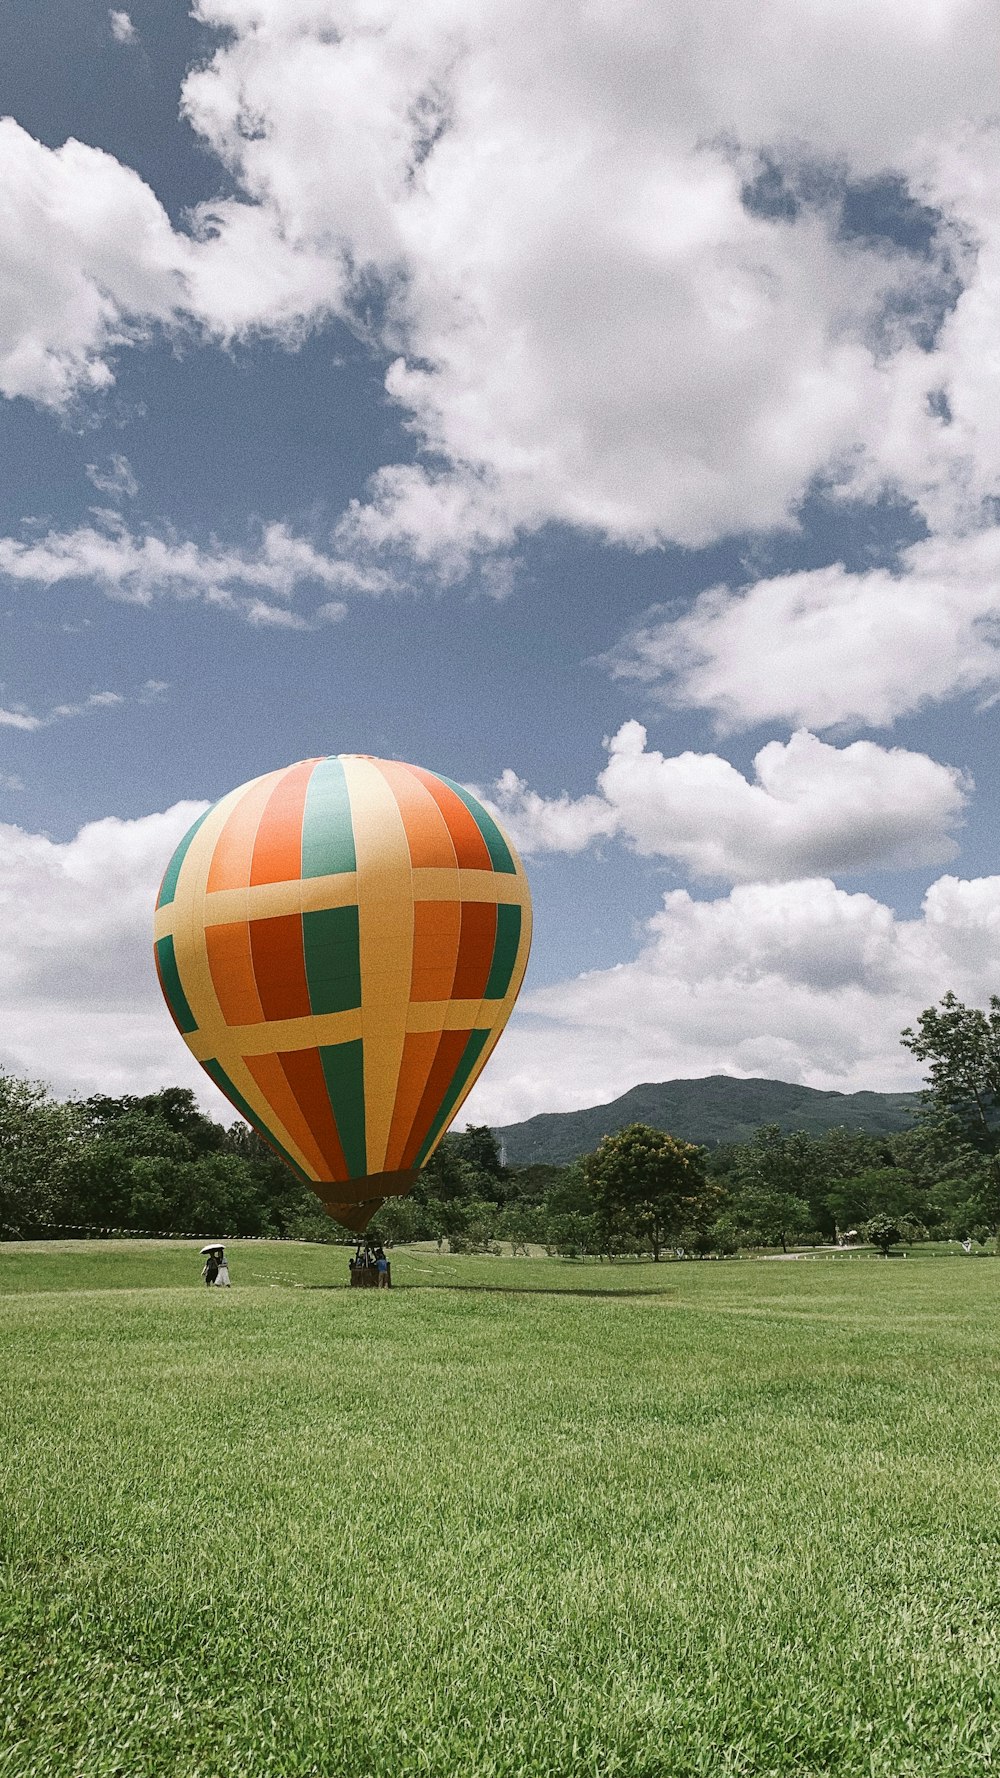 a large hot air balloon flying over a lush green field